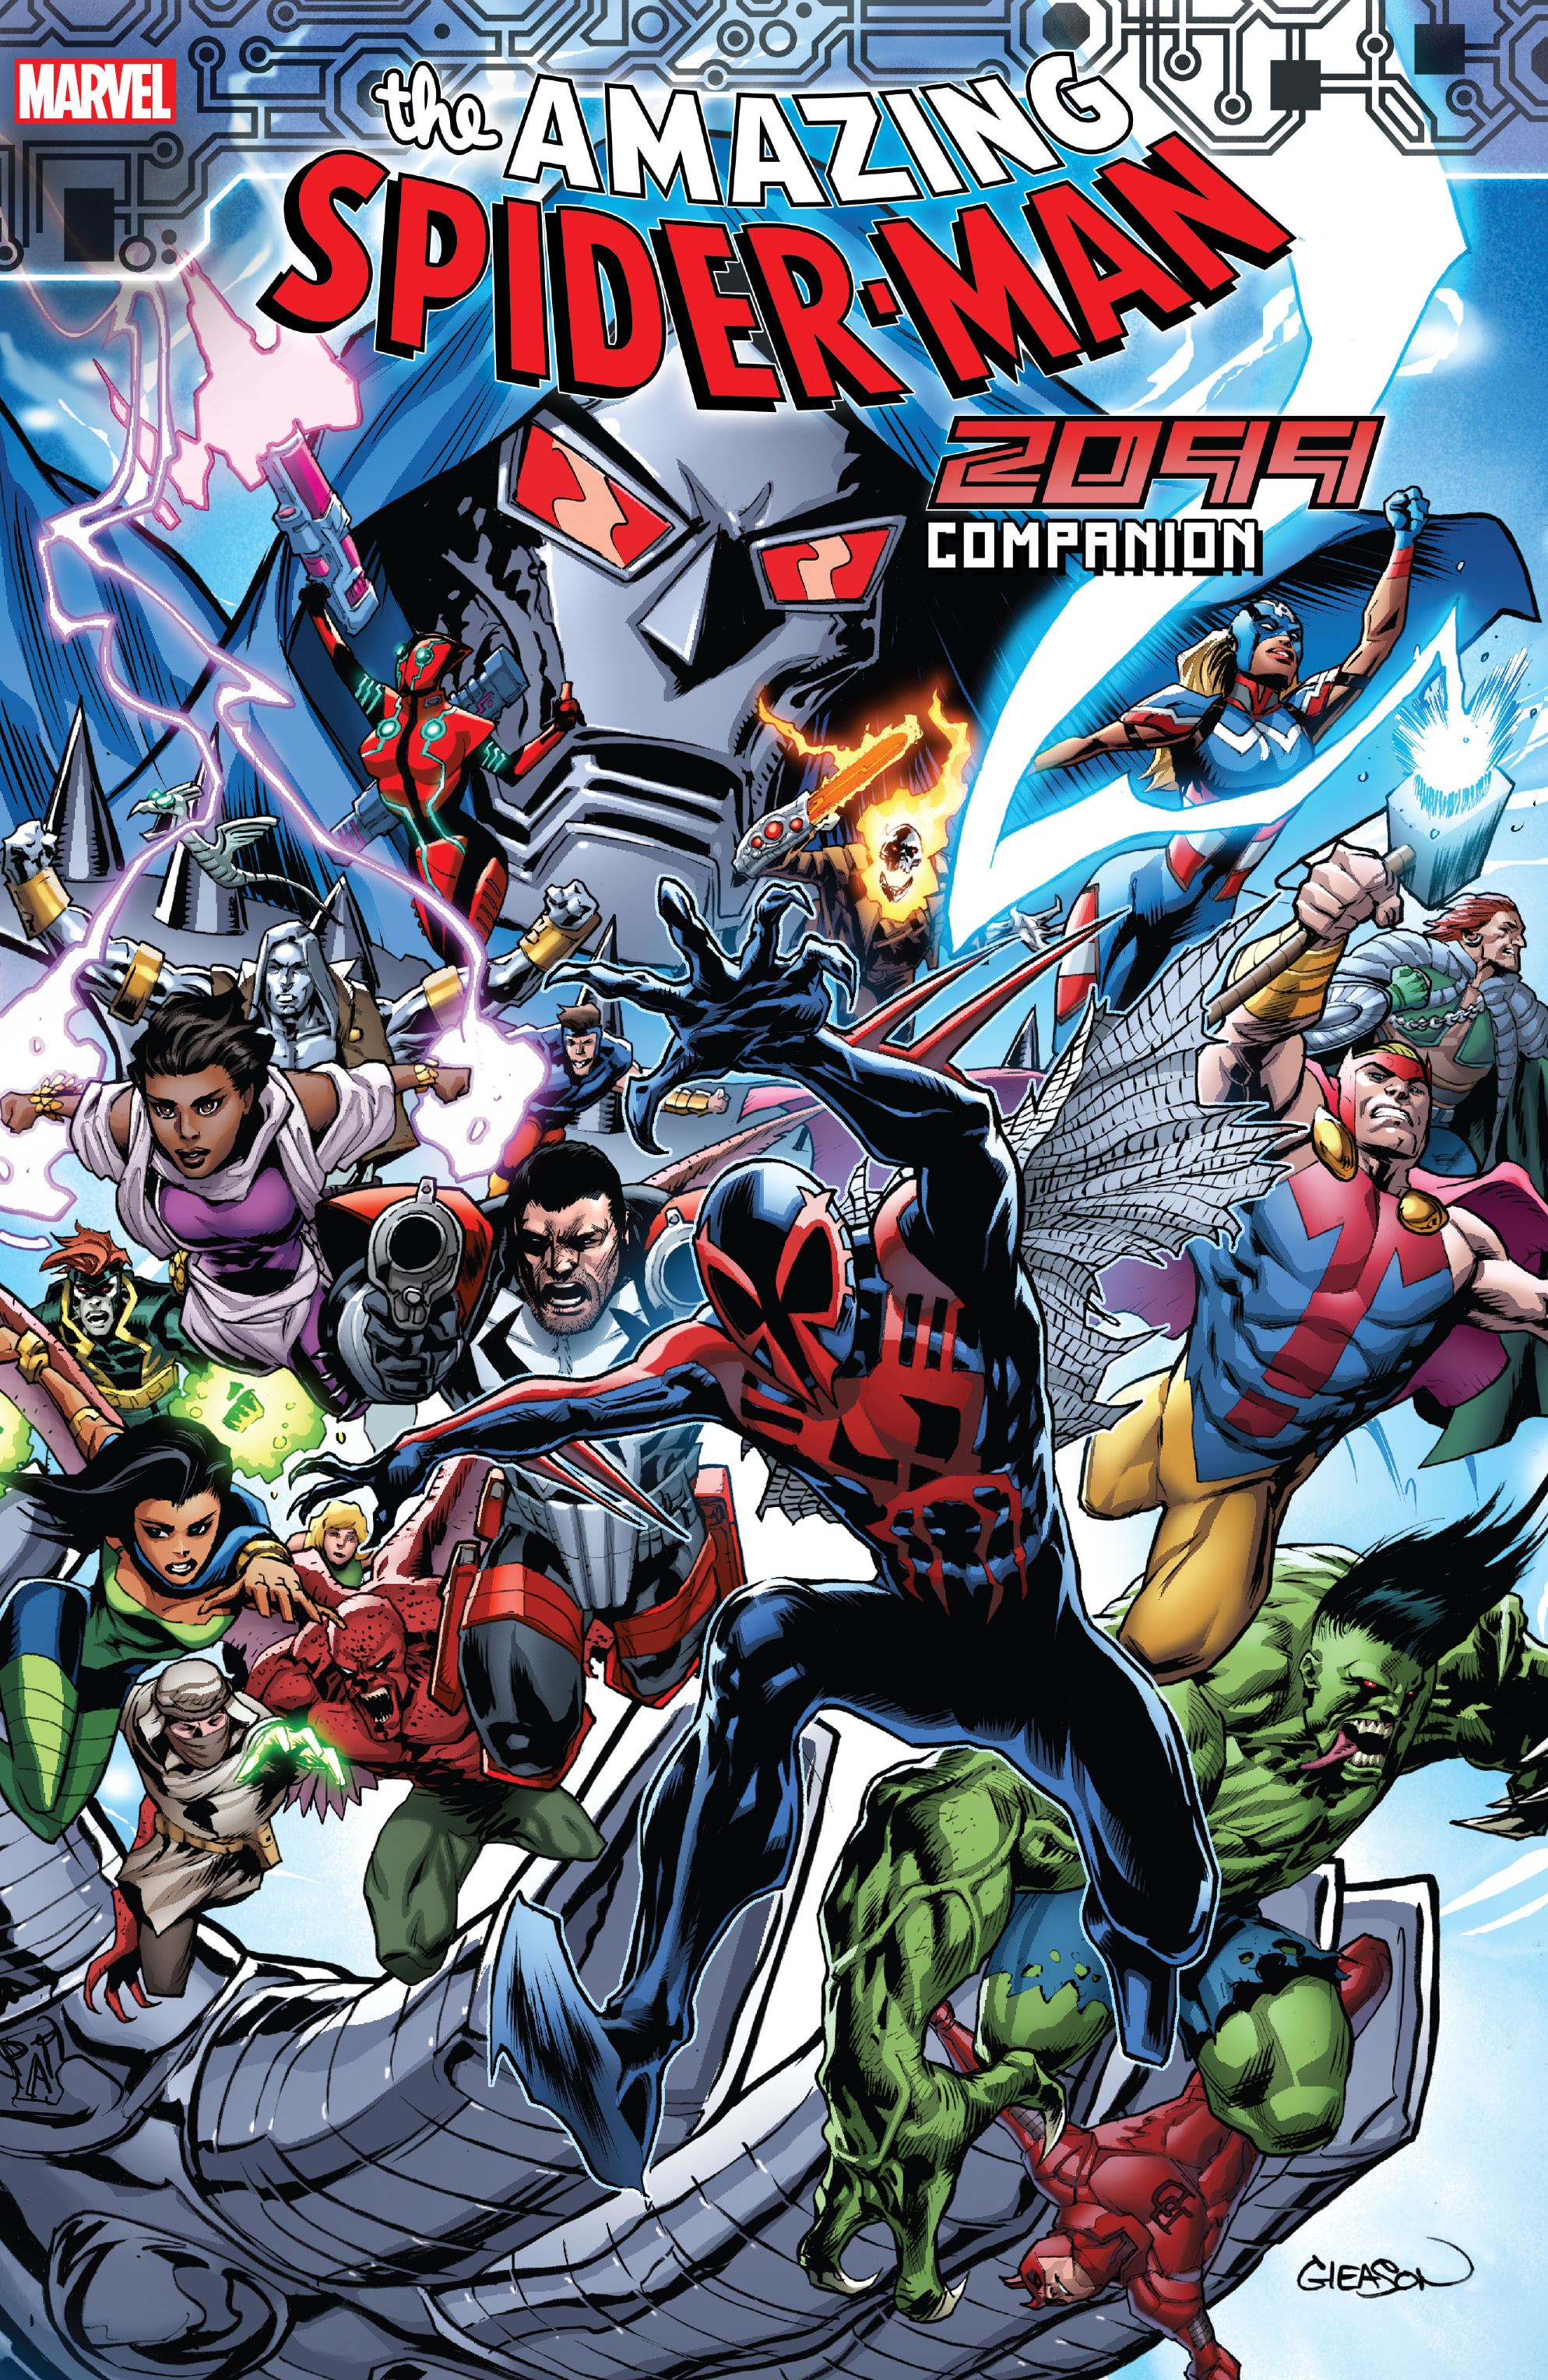 Amazing Spider-Man 2099 Companion (2020): Chapter 1 - Page 1